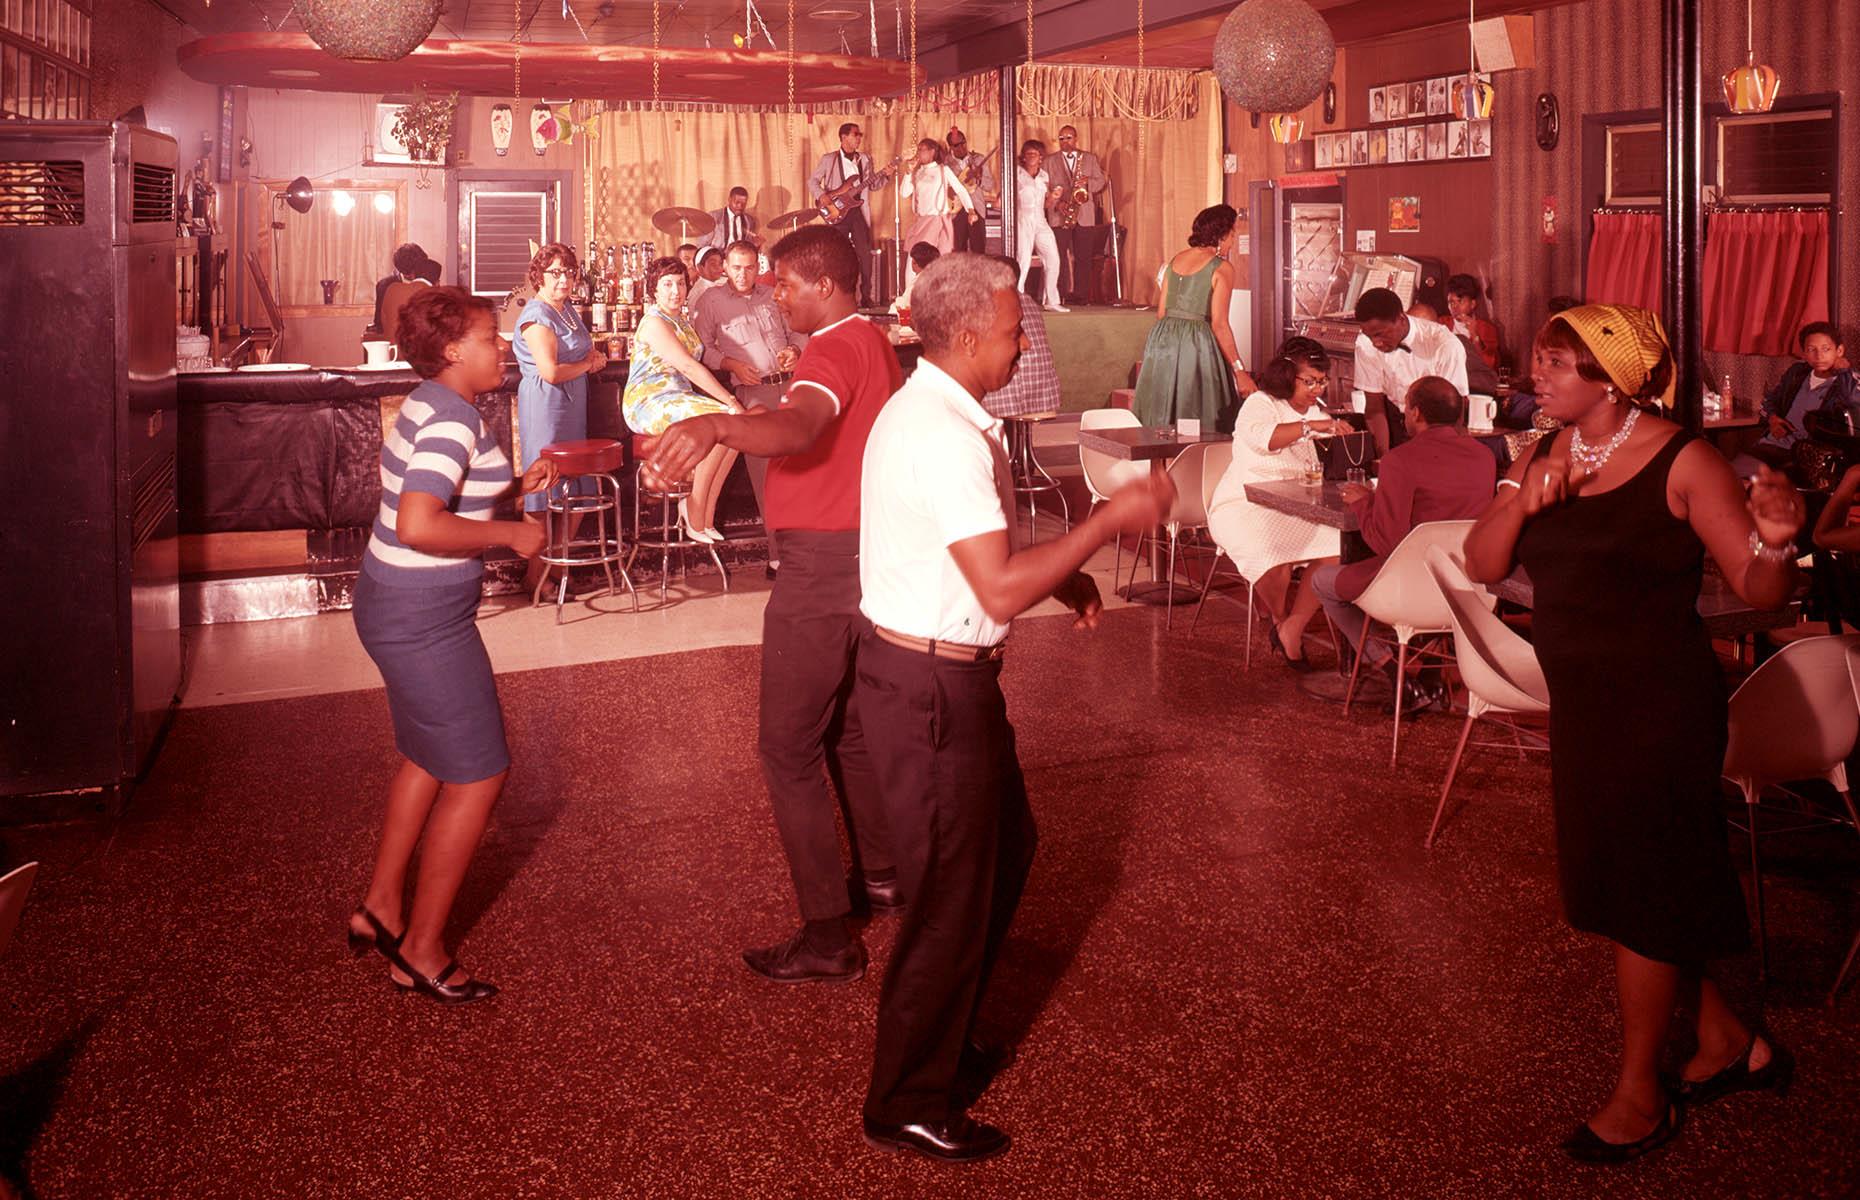 Utopia Lodge, in New York's Greenfield Park, was another popular Catskill Mountains resort. It came complete with a cocktail lounge, a pool, tennis courts and more. Here guests are photographed letting their hair down in the evening, enjoying drinks at the bar and dancing to music from a live band. The photo dates to the 1960s.